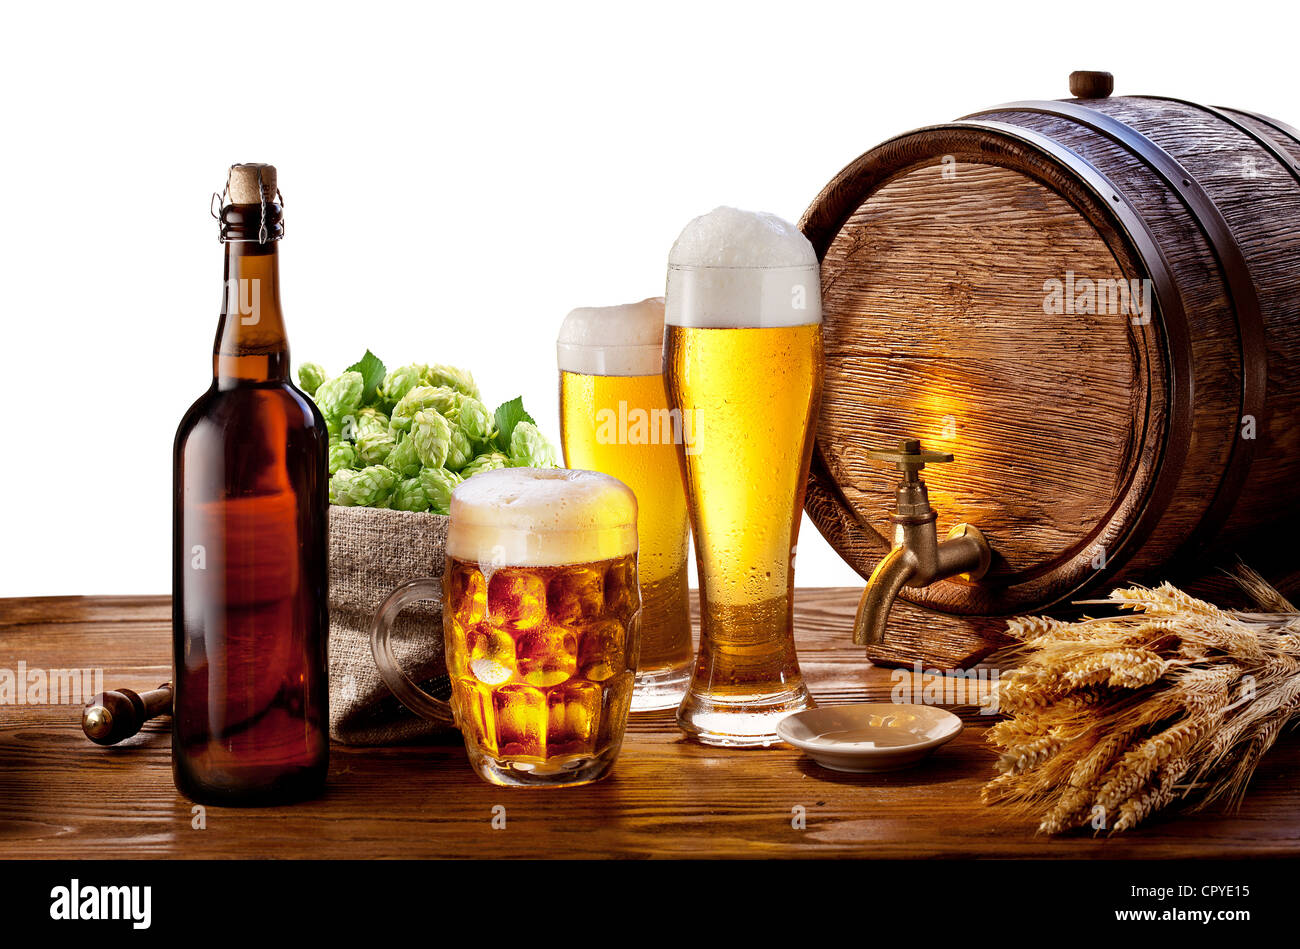 https://c8.alamy.com/comp/CPYE15/beer-barrel-with-beer-glasses-on-a-wooden-table-isolated-on-a-white-CPYE15.jpg